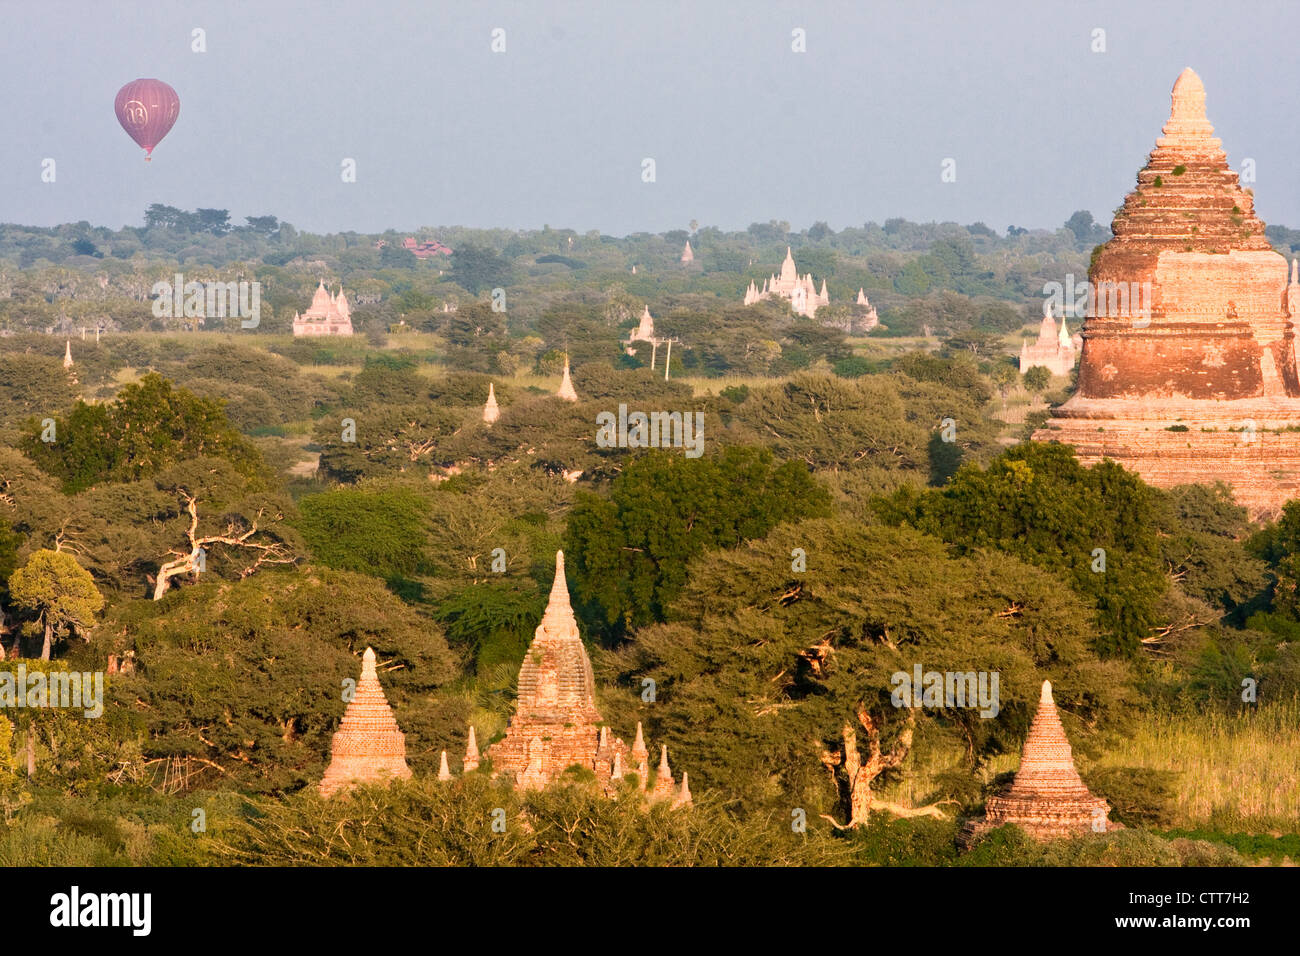 Myanmar, Burma, Bagan. Hot-air Balloons offer Tourists an Aerial View of the Temples. Stock Photo